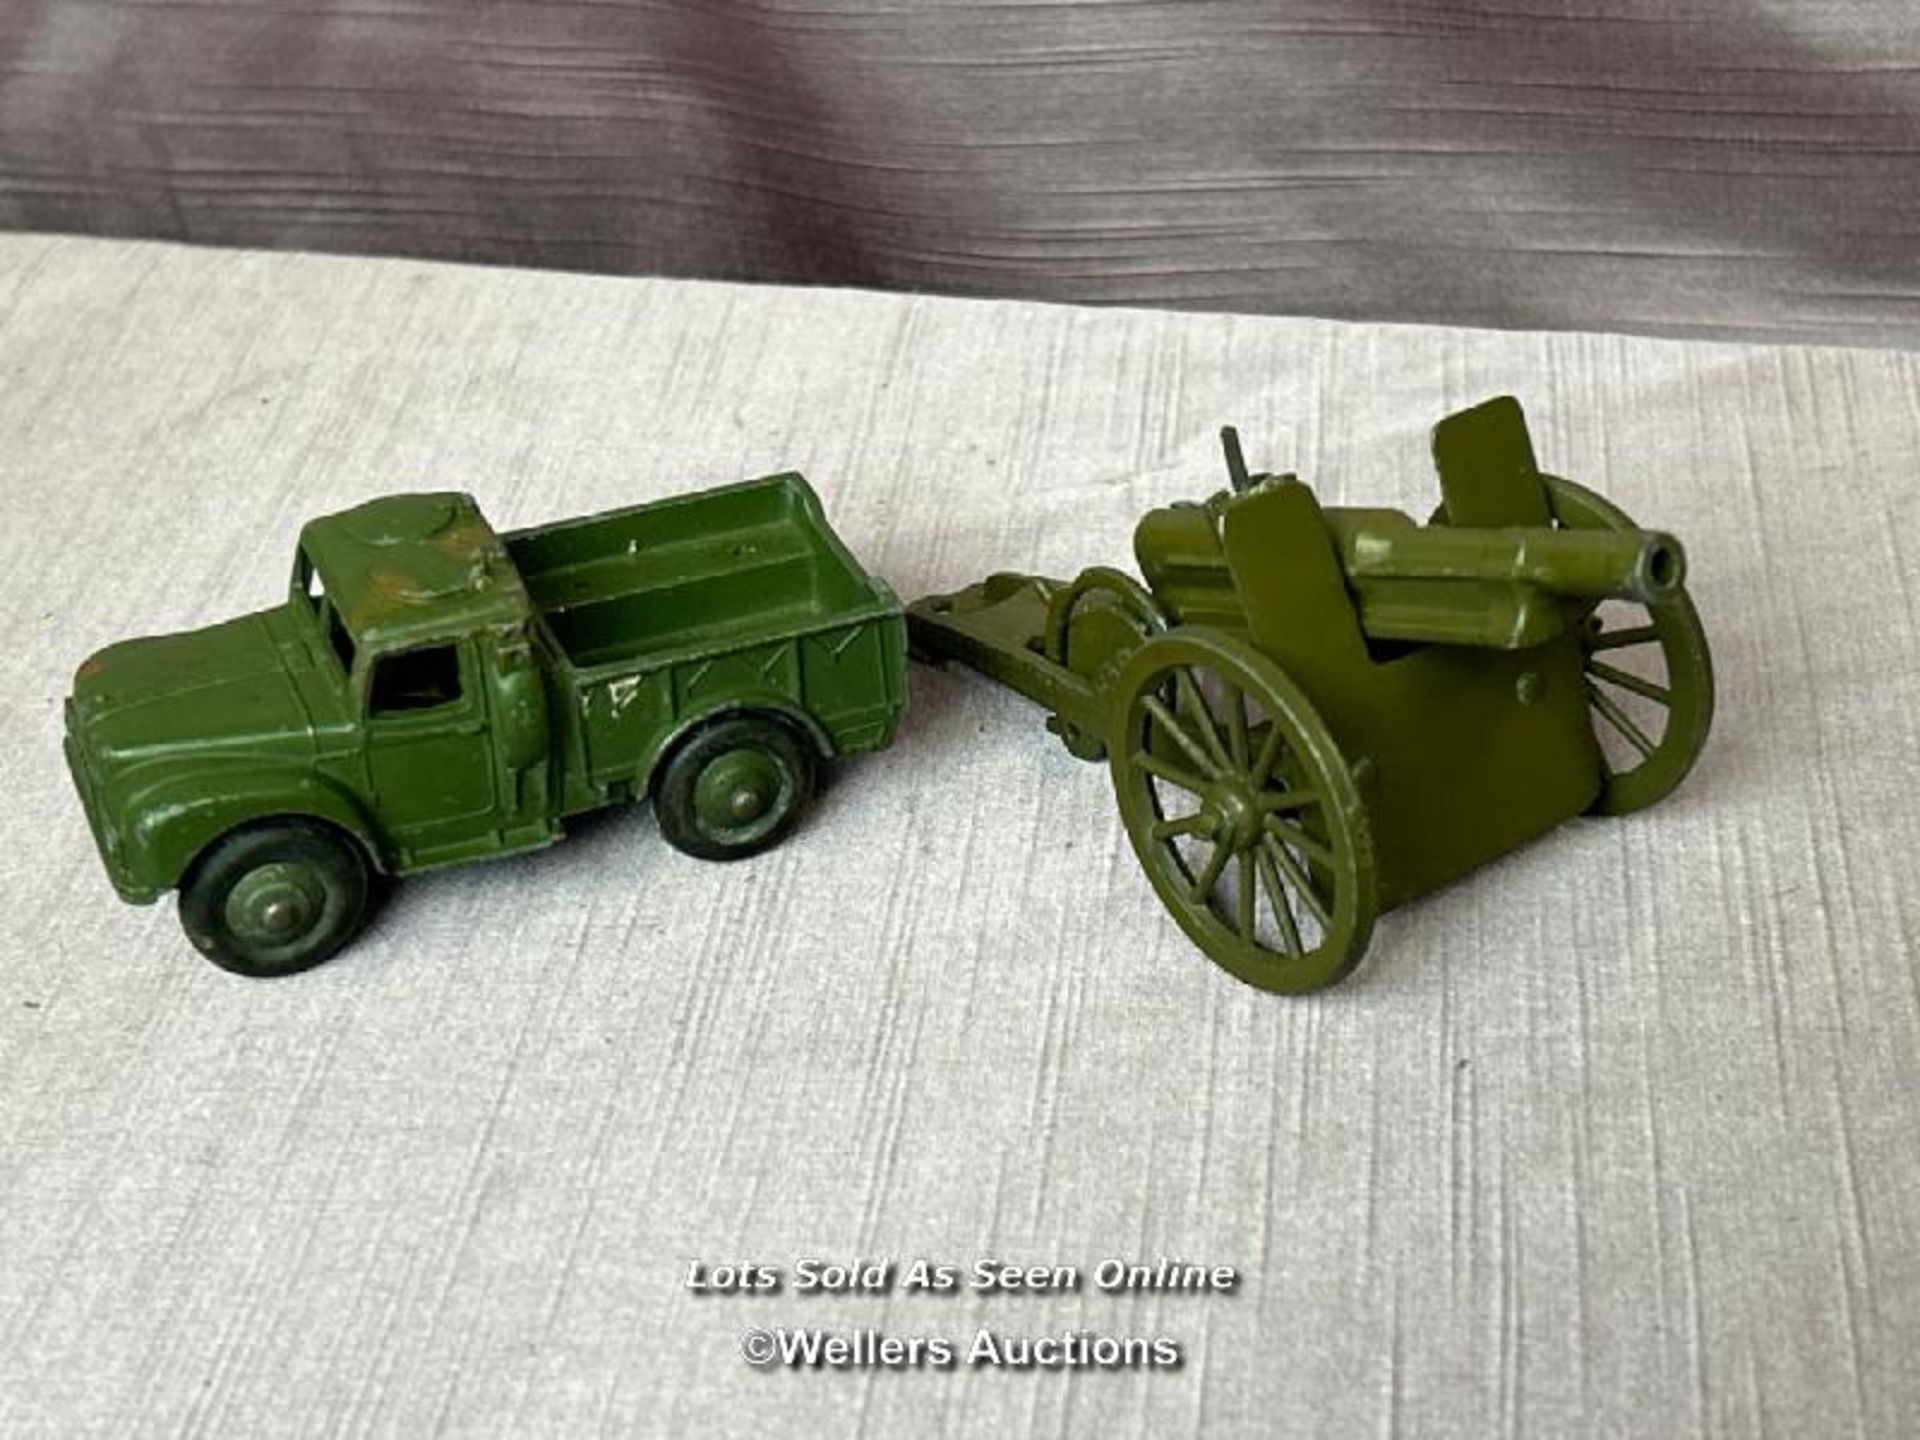 TWO DINKY DIE CAST MILITARY MODELS INCLUDING ONE TONNE CARGO TRUCK NO. 614 AND A MOBILE CANNON